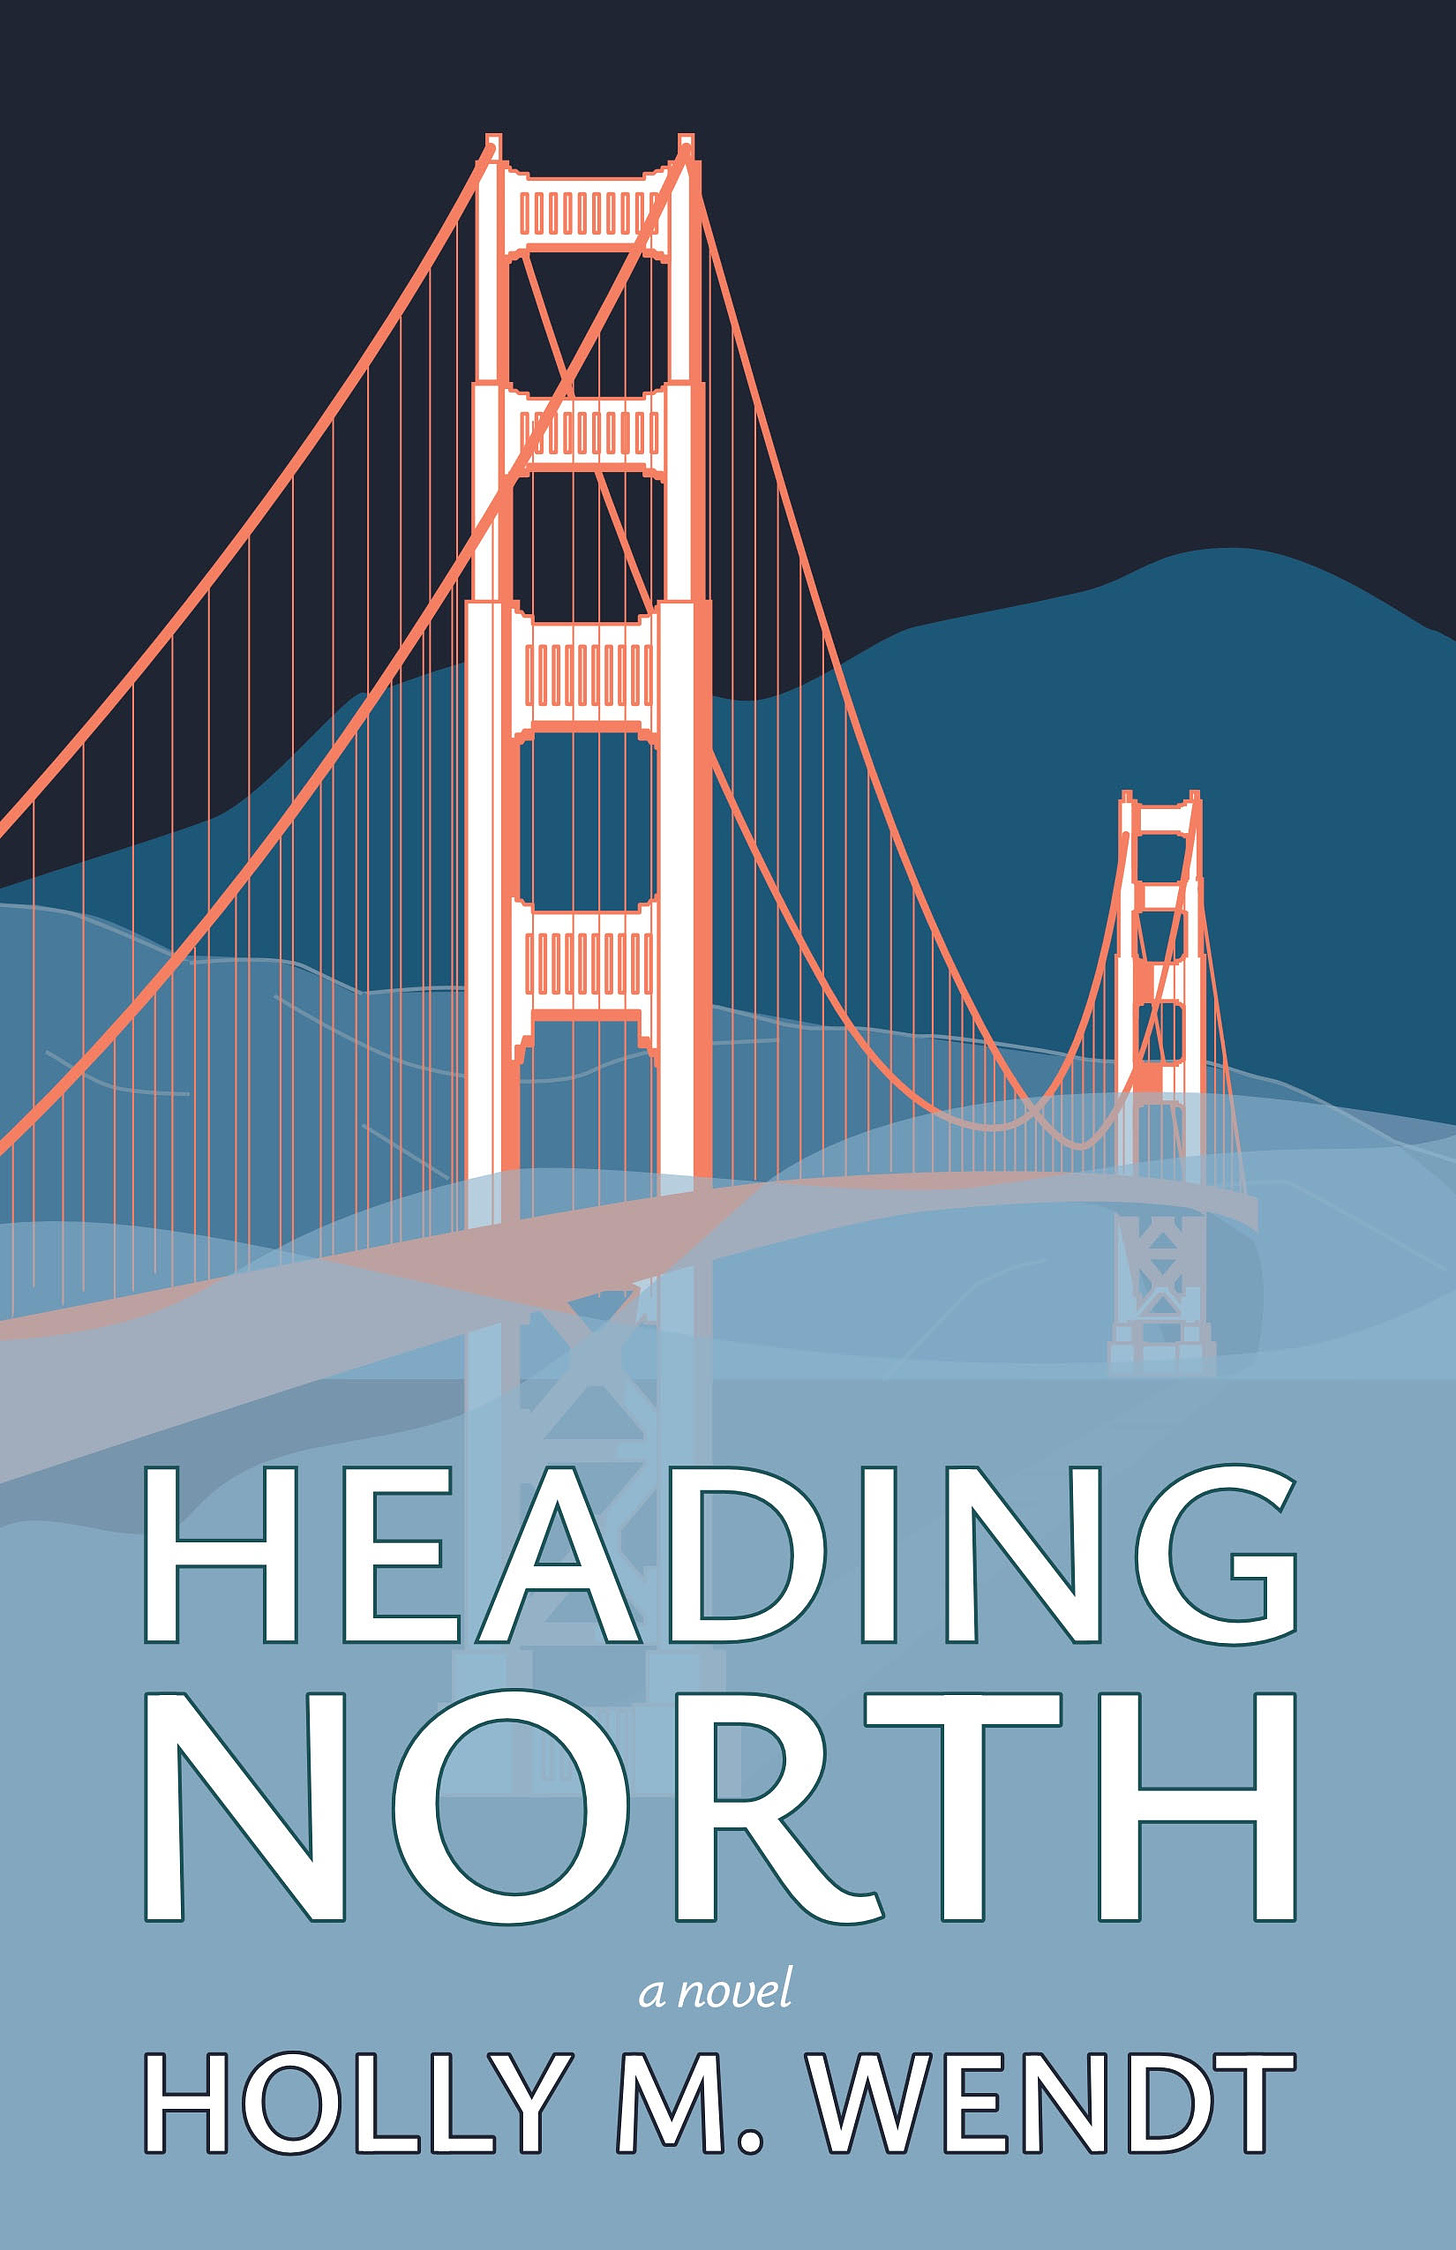 The cover of Heading North by Holly M. Wendt: a soft orange and white silhouette of the Golden Gate Bridge crosses a very dark blue background, above the suggestion of fog and waves and hills in softer shades of blue.